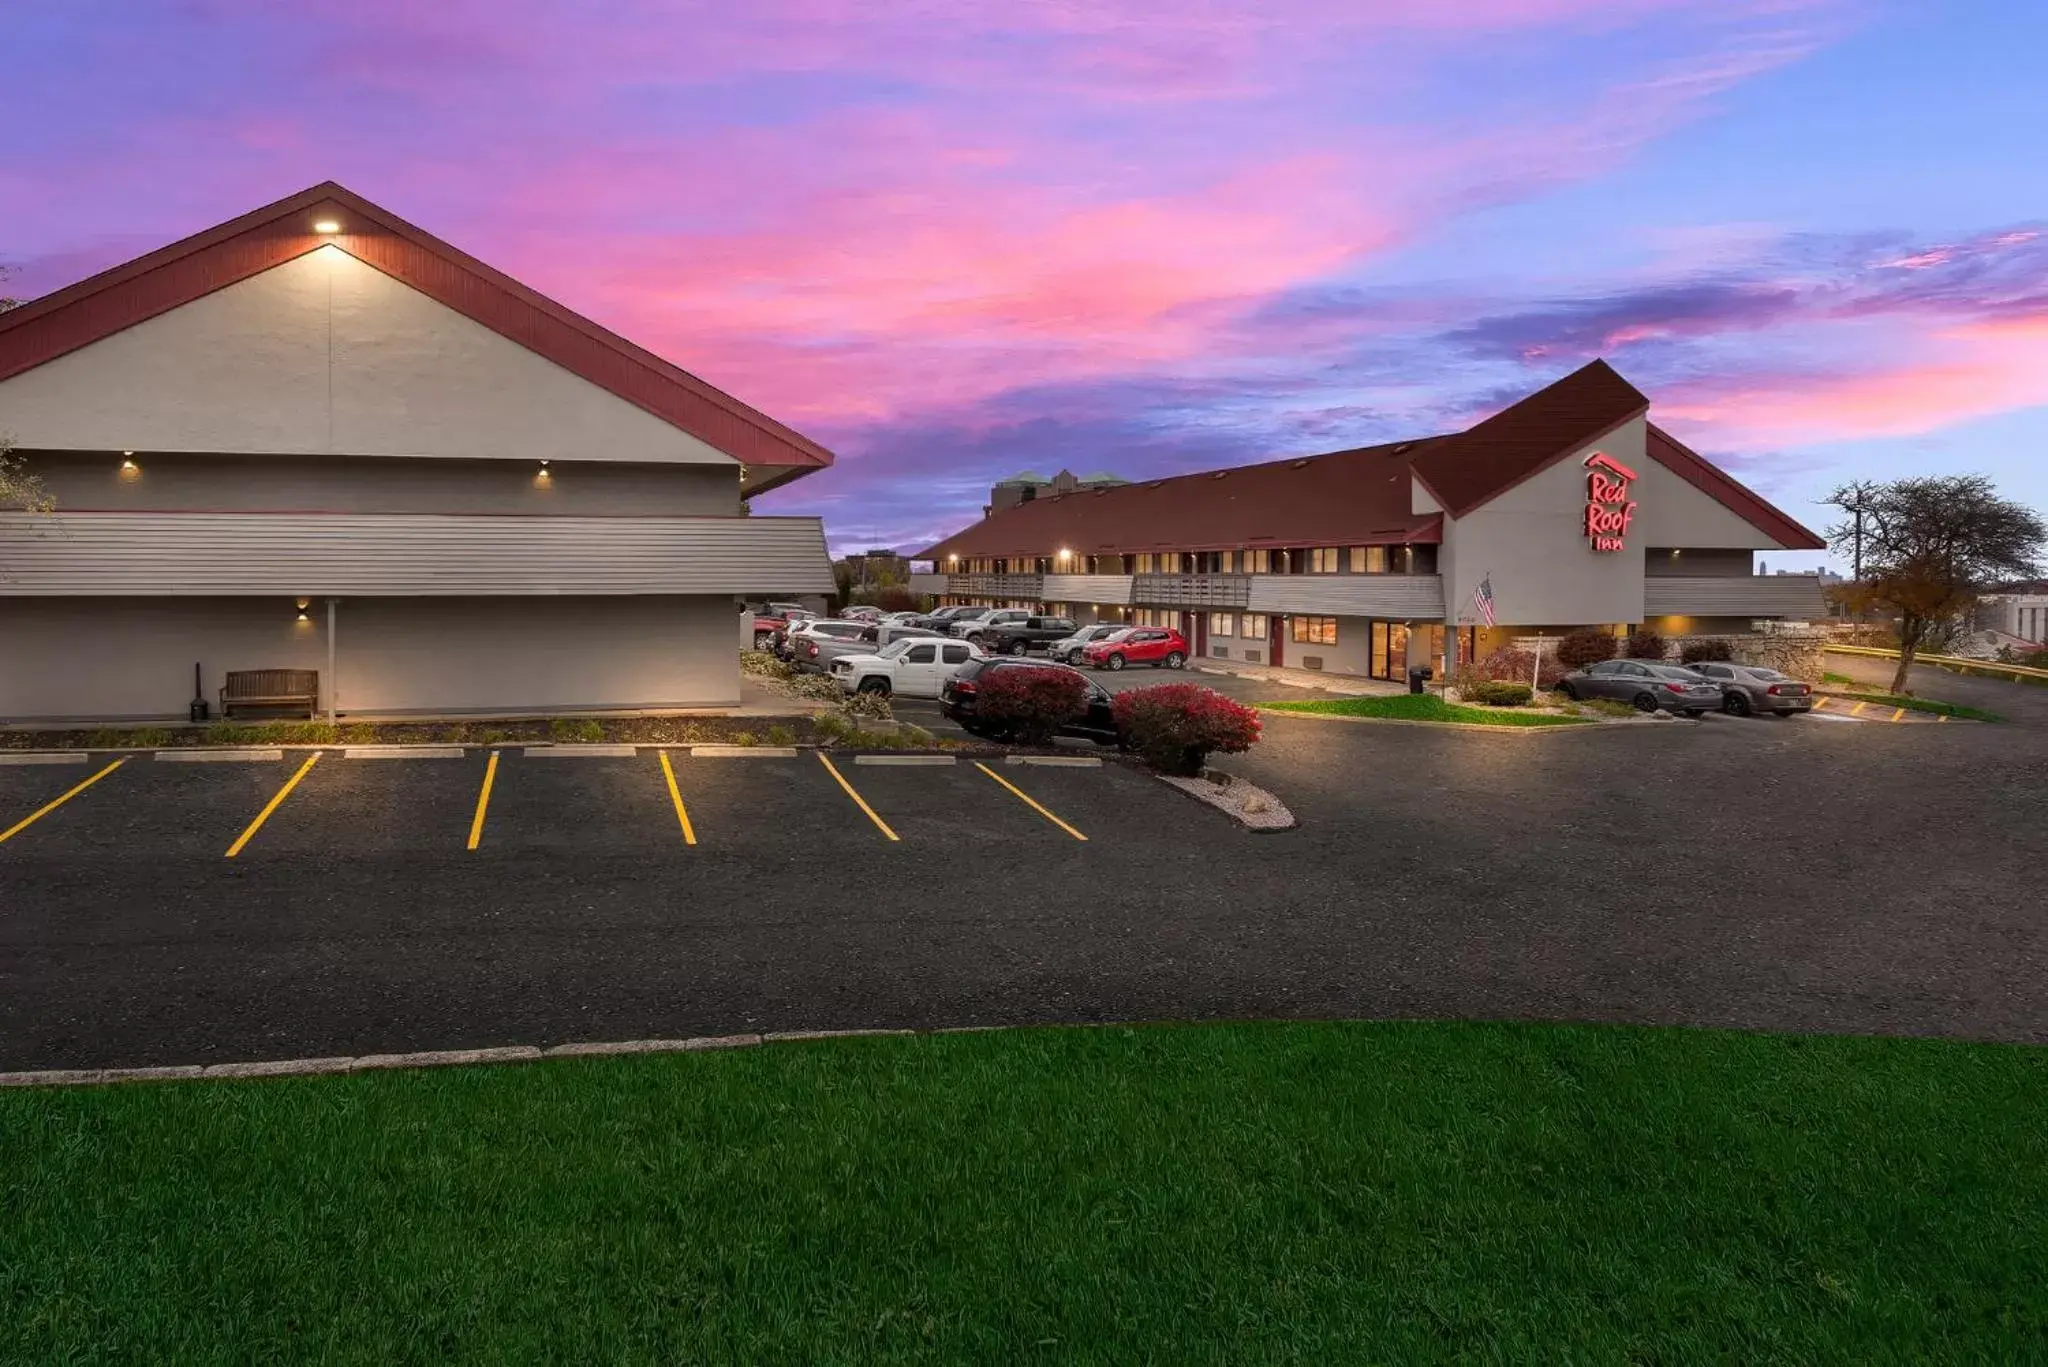 Property Building in Red Roof Inn Cleveland - Independence